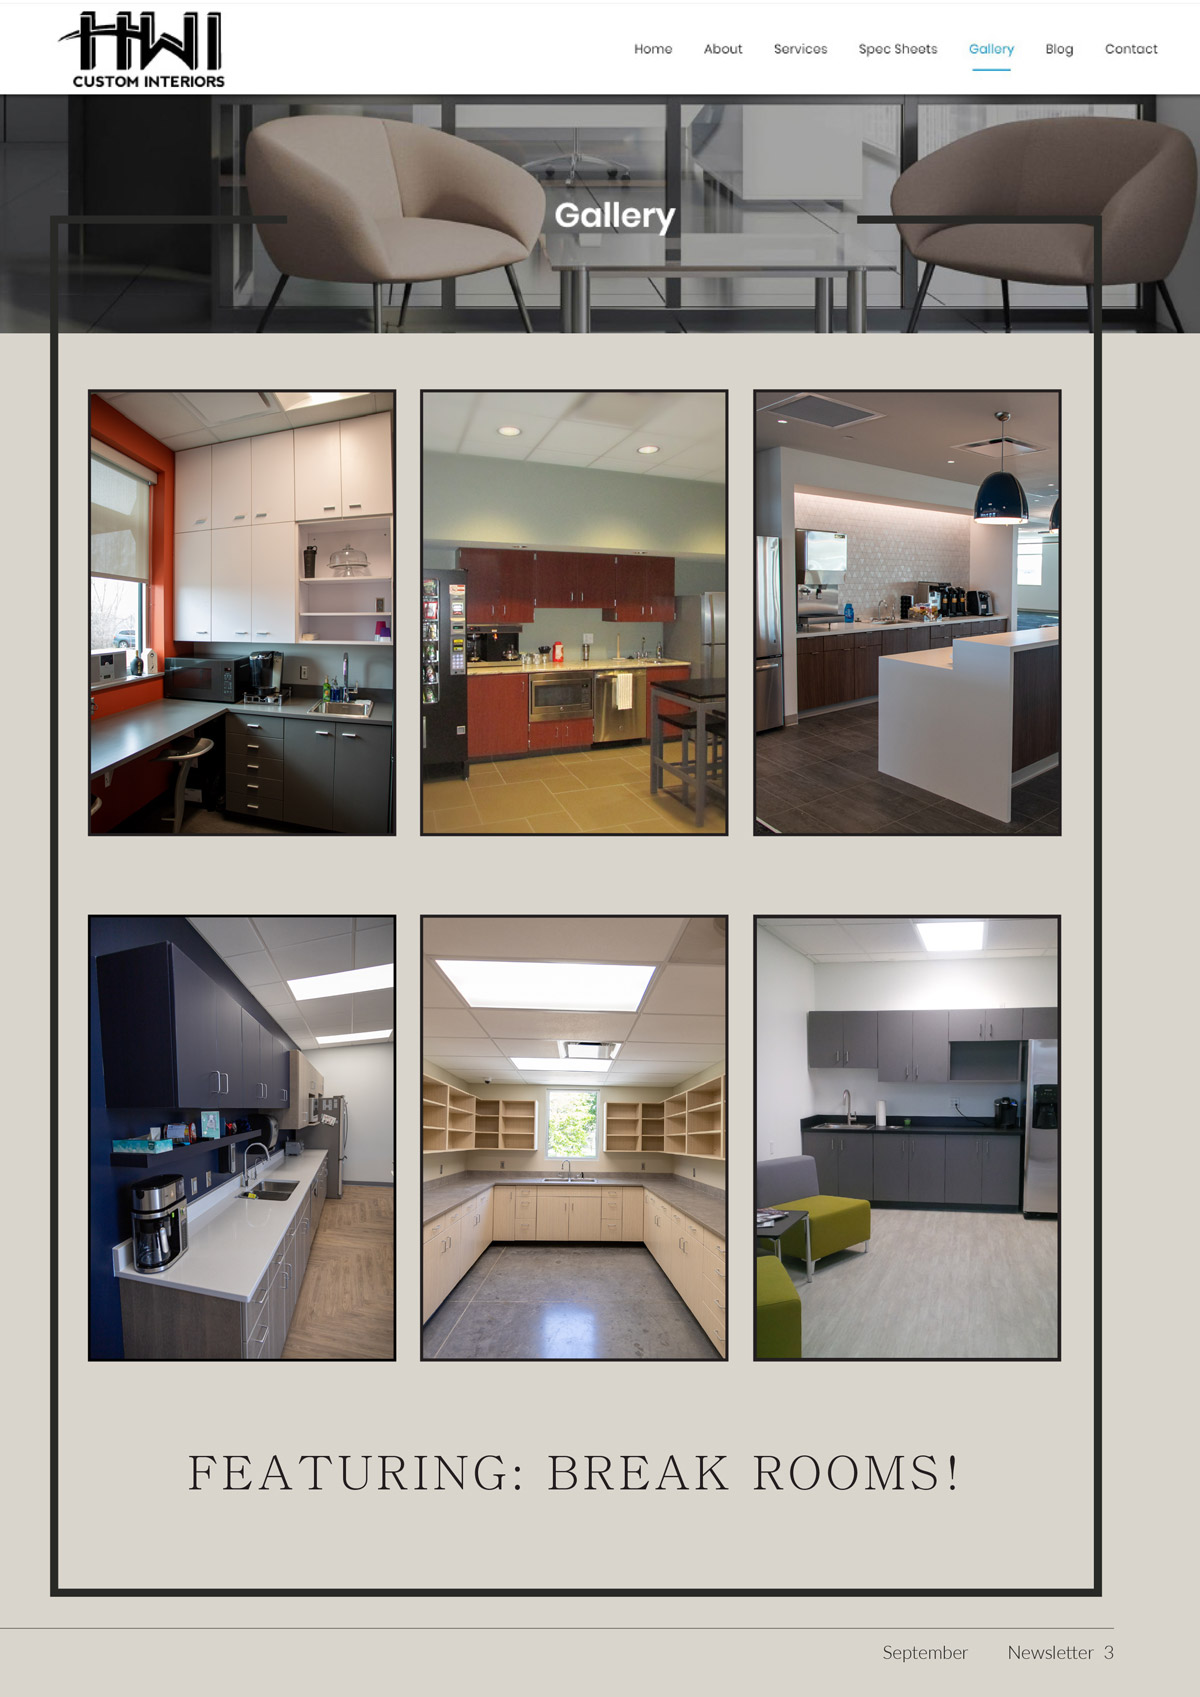 Page 3 - Gallery featuring a variety of modern break rooms.